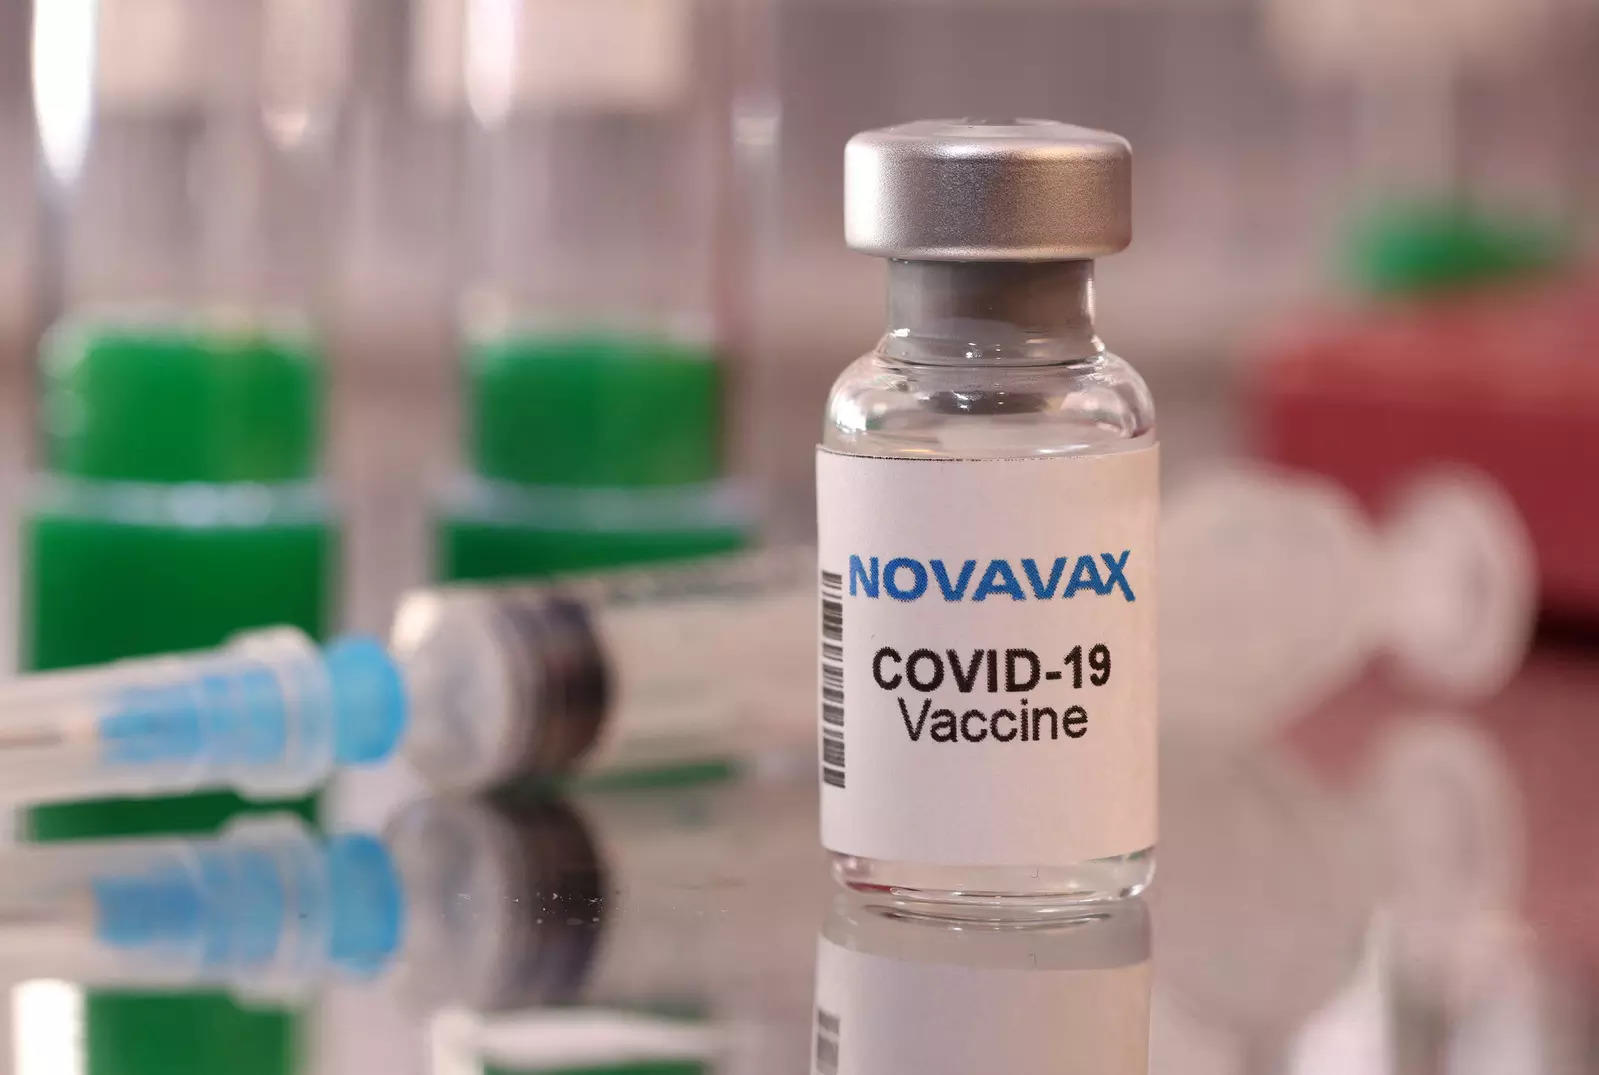 More than 196.89 cr COVID-19 vaccine doses provided to States, UTs